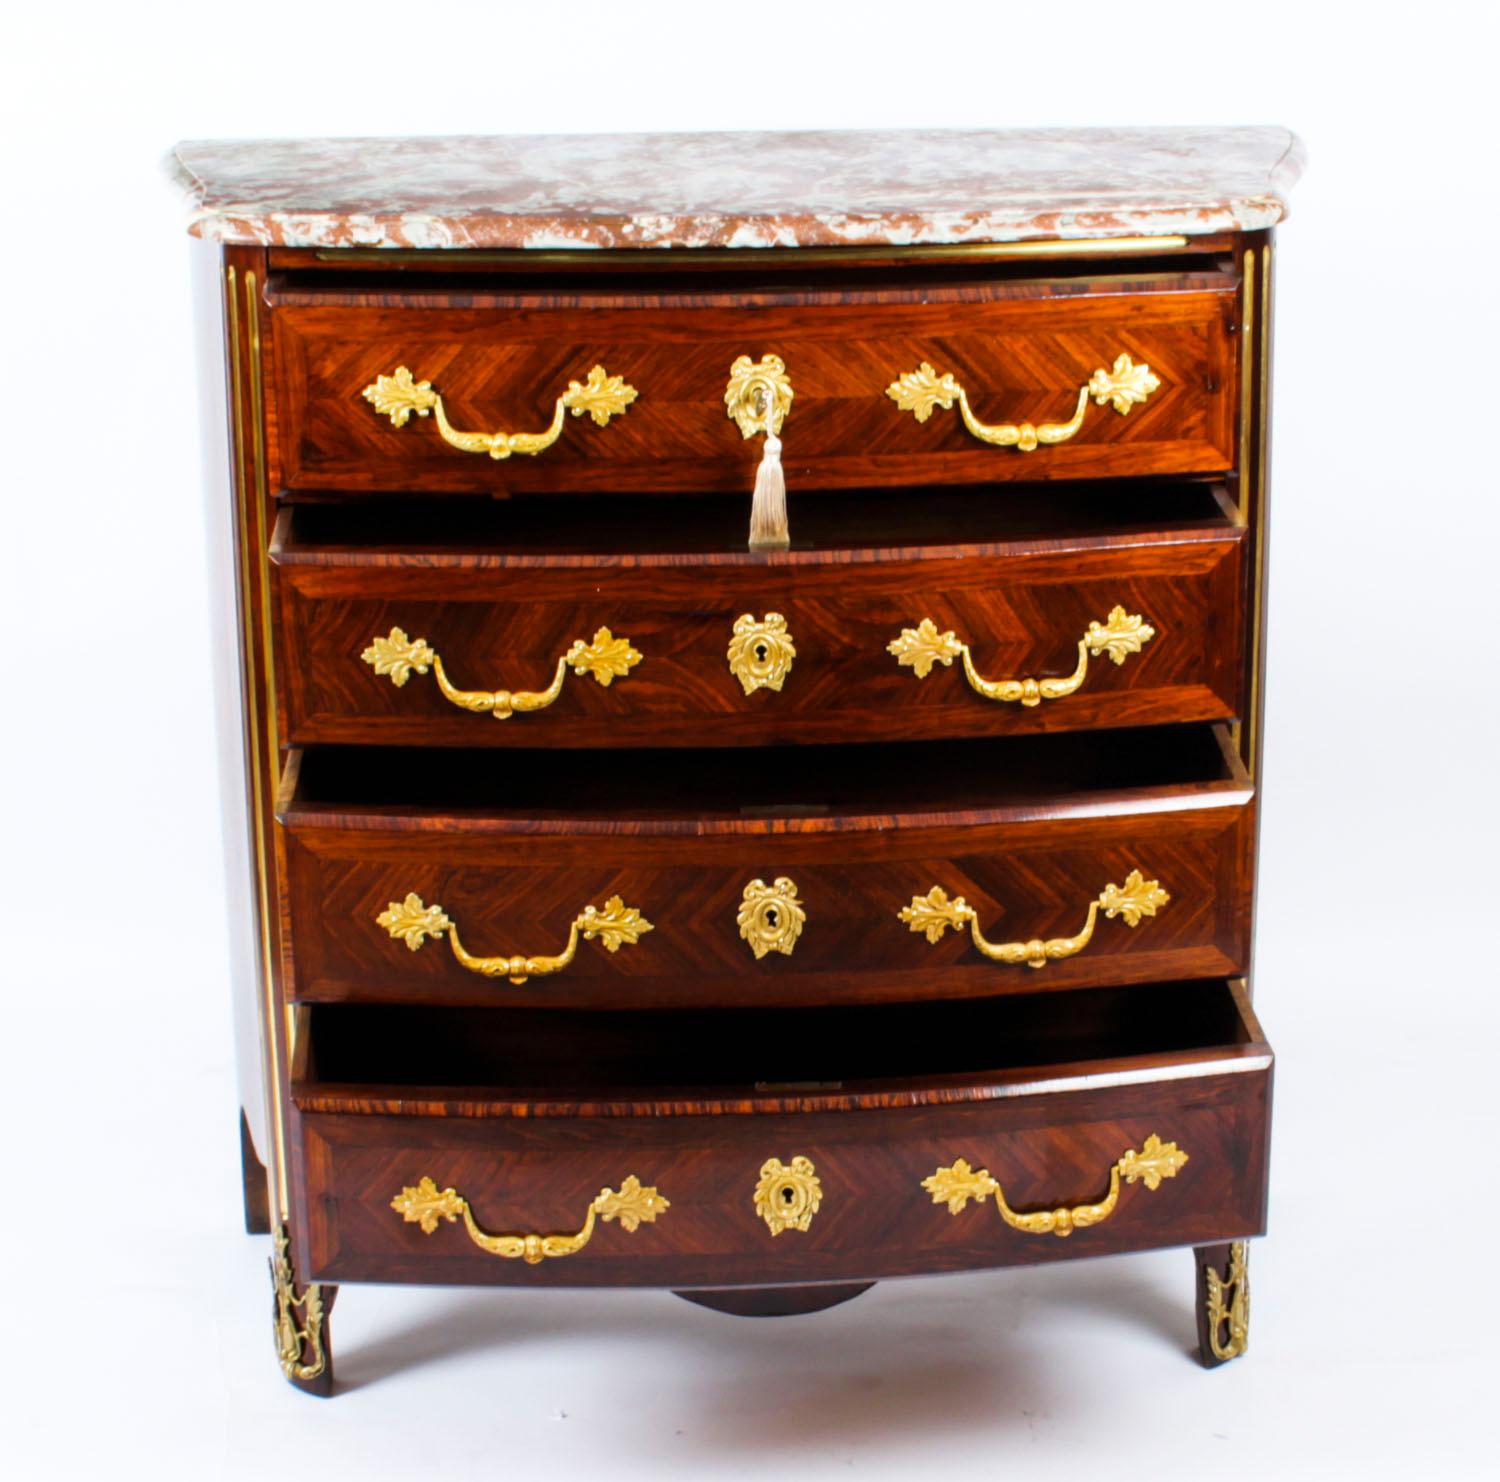 Antique Marble Topped Ormolu-Mounted Goncalo Alves Commode Chest, 19th Century 9